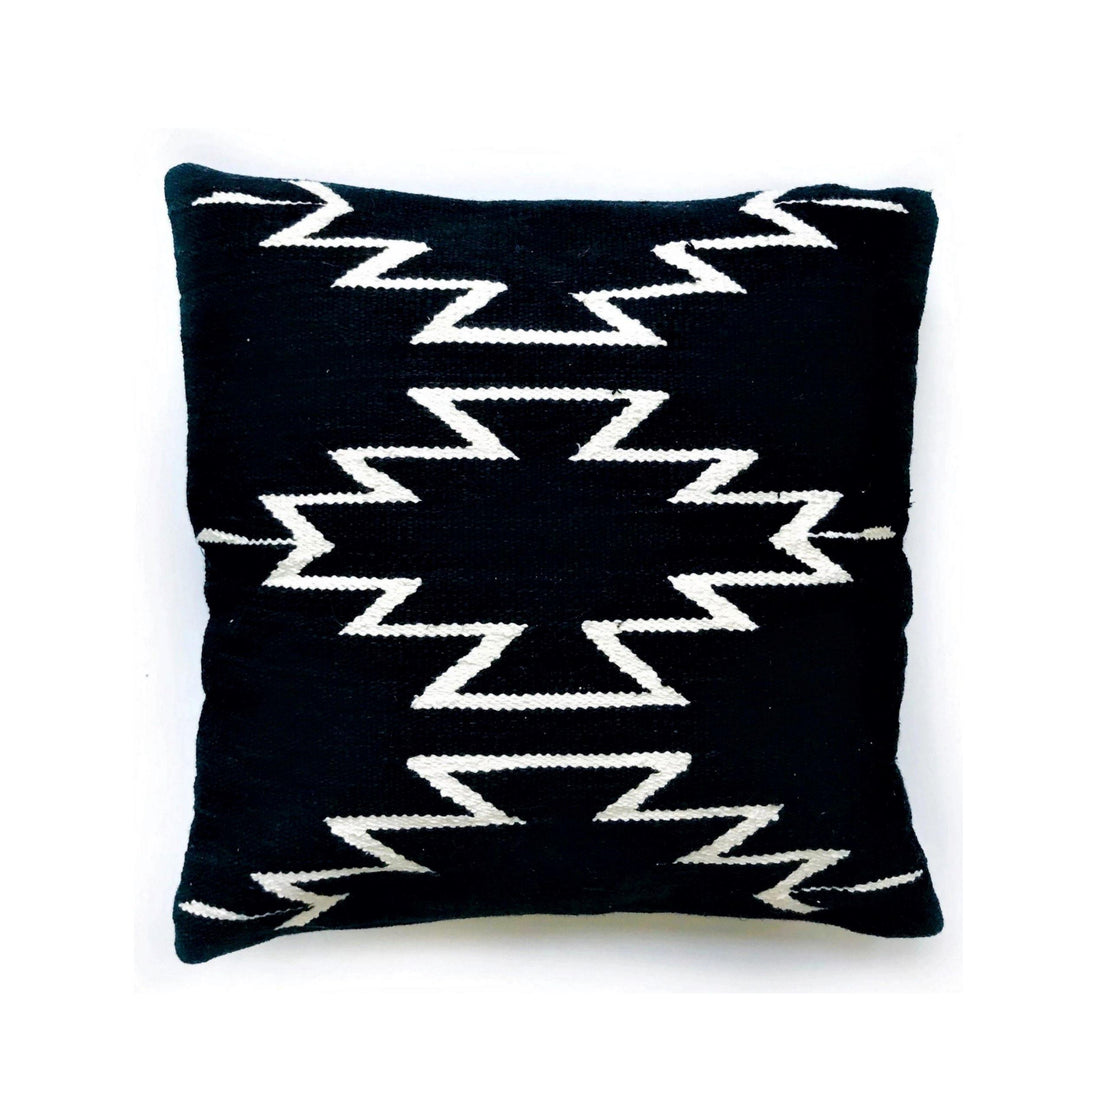 Black Cleo Handwoven Cotton Decorative Throw Pillow Cover